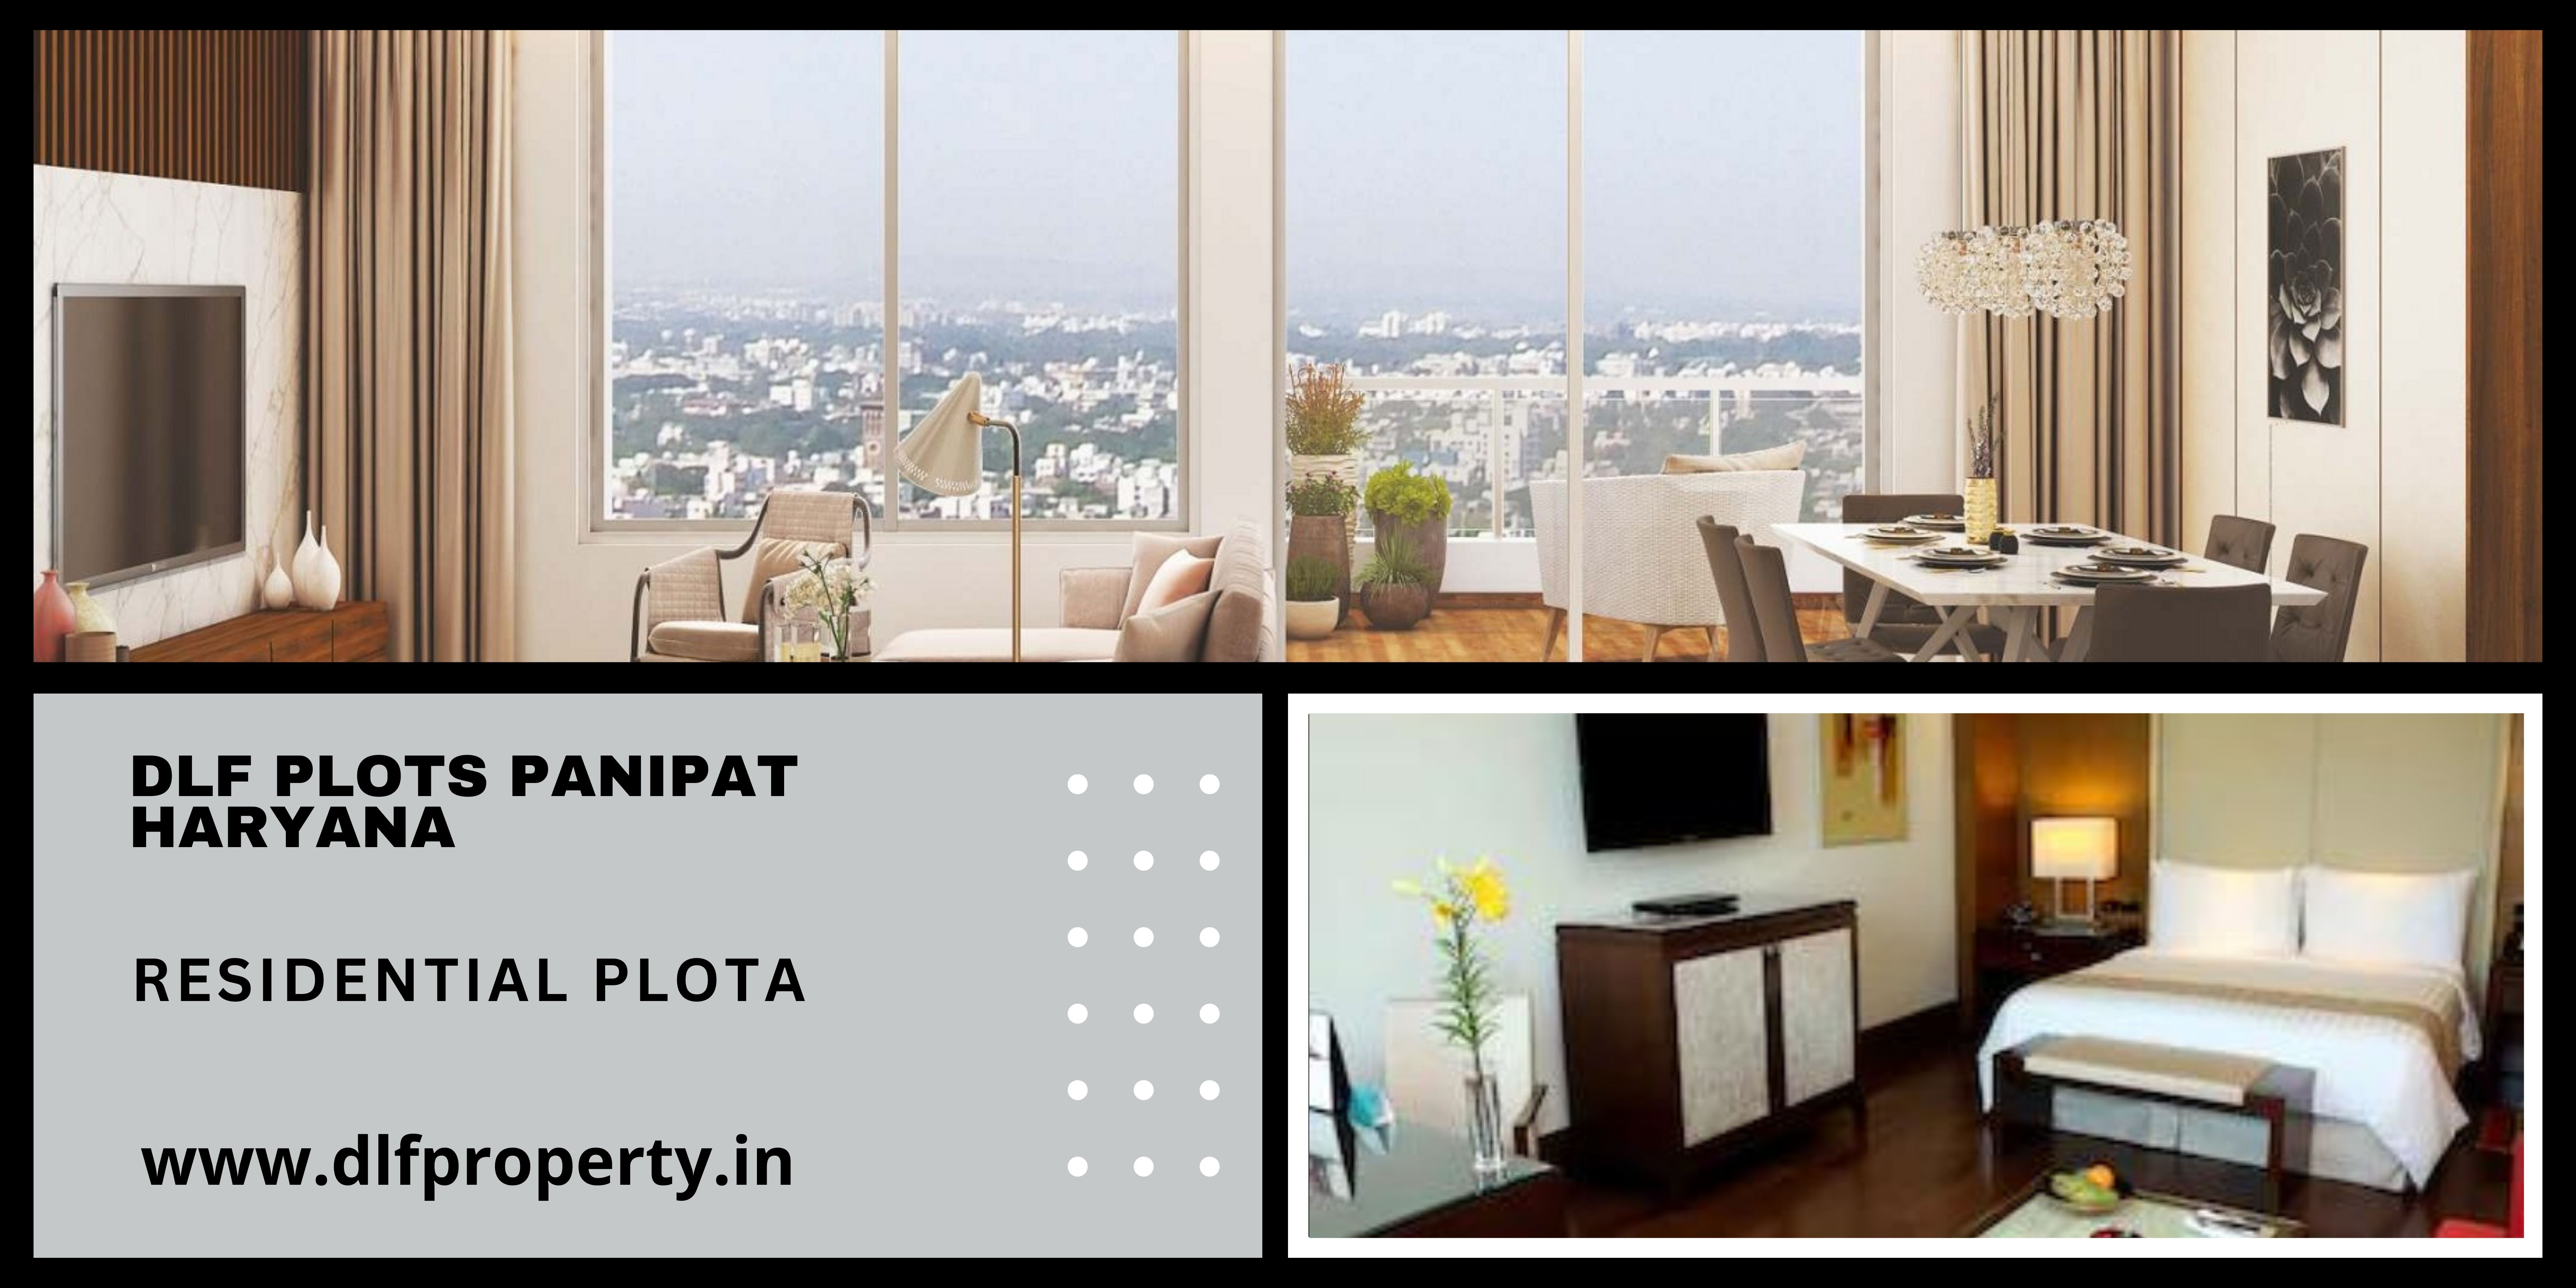 DLF Project In Panipat | The Lifestyle You Deserve